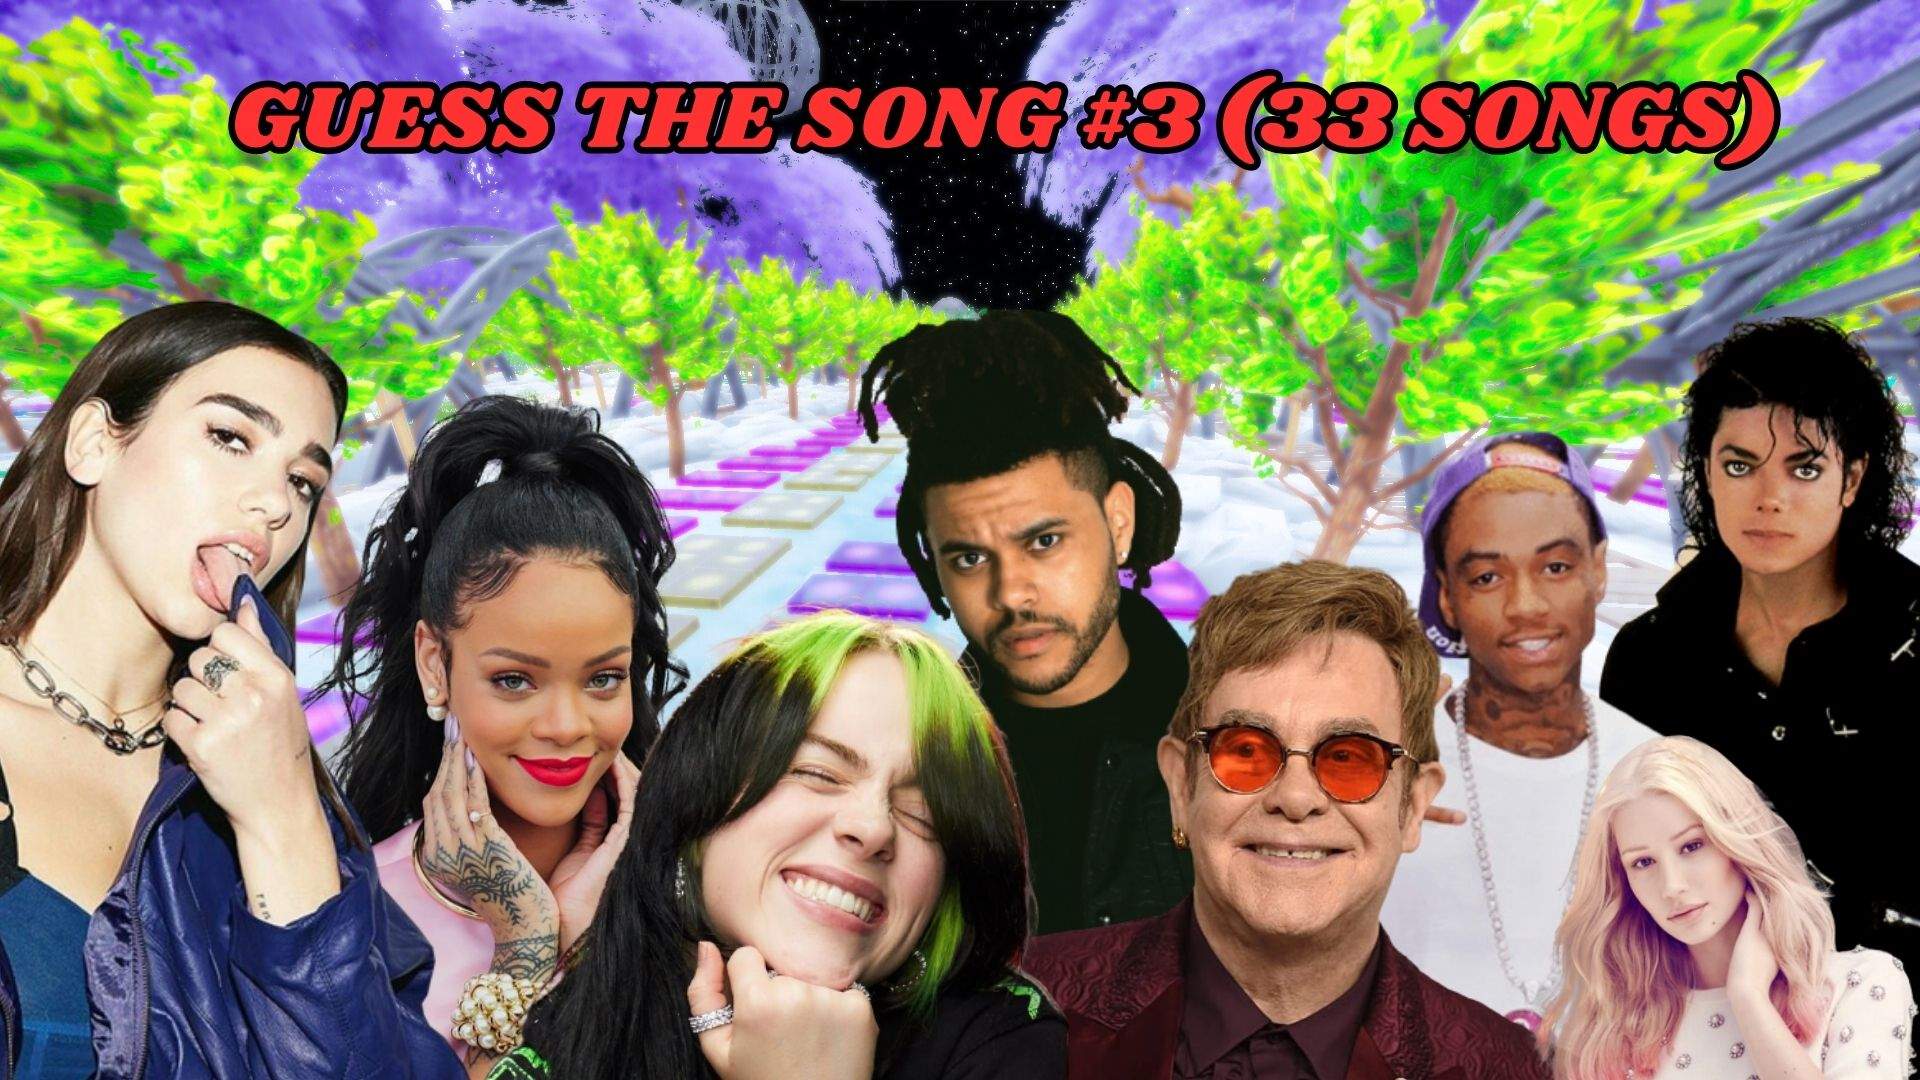 🎹 GUESS THE SONG #3 (33 SONGS) 🎹